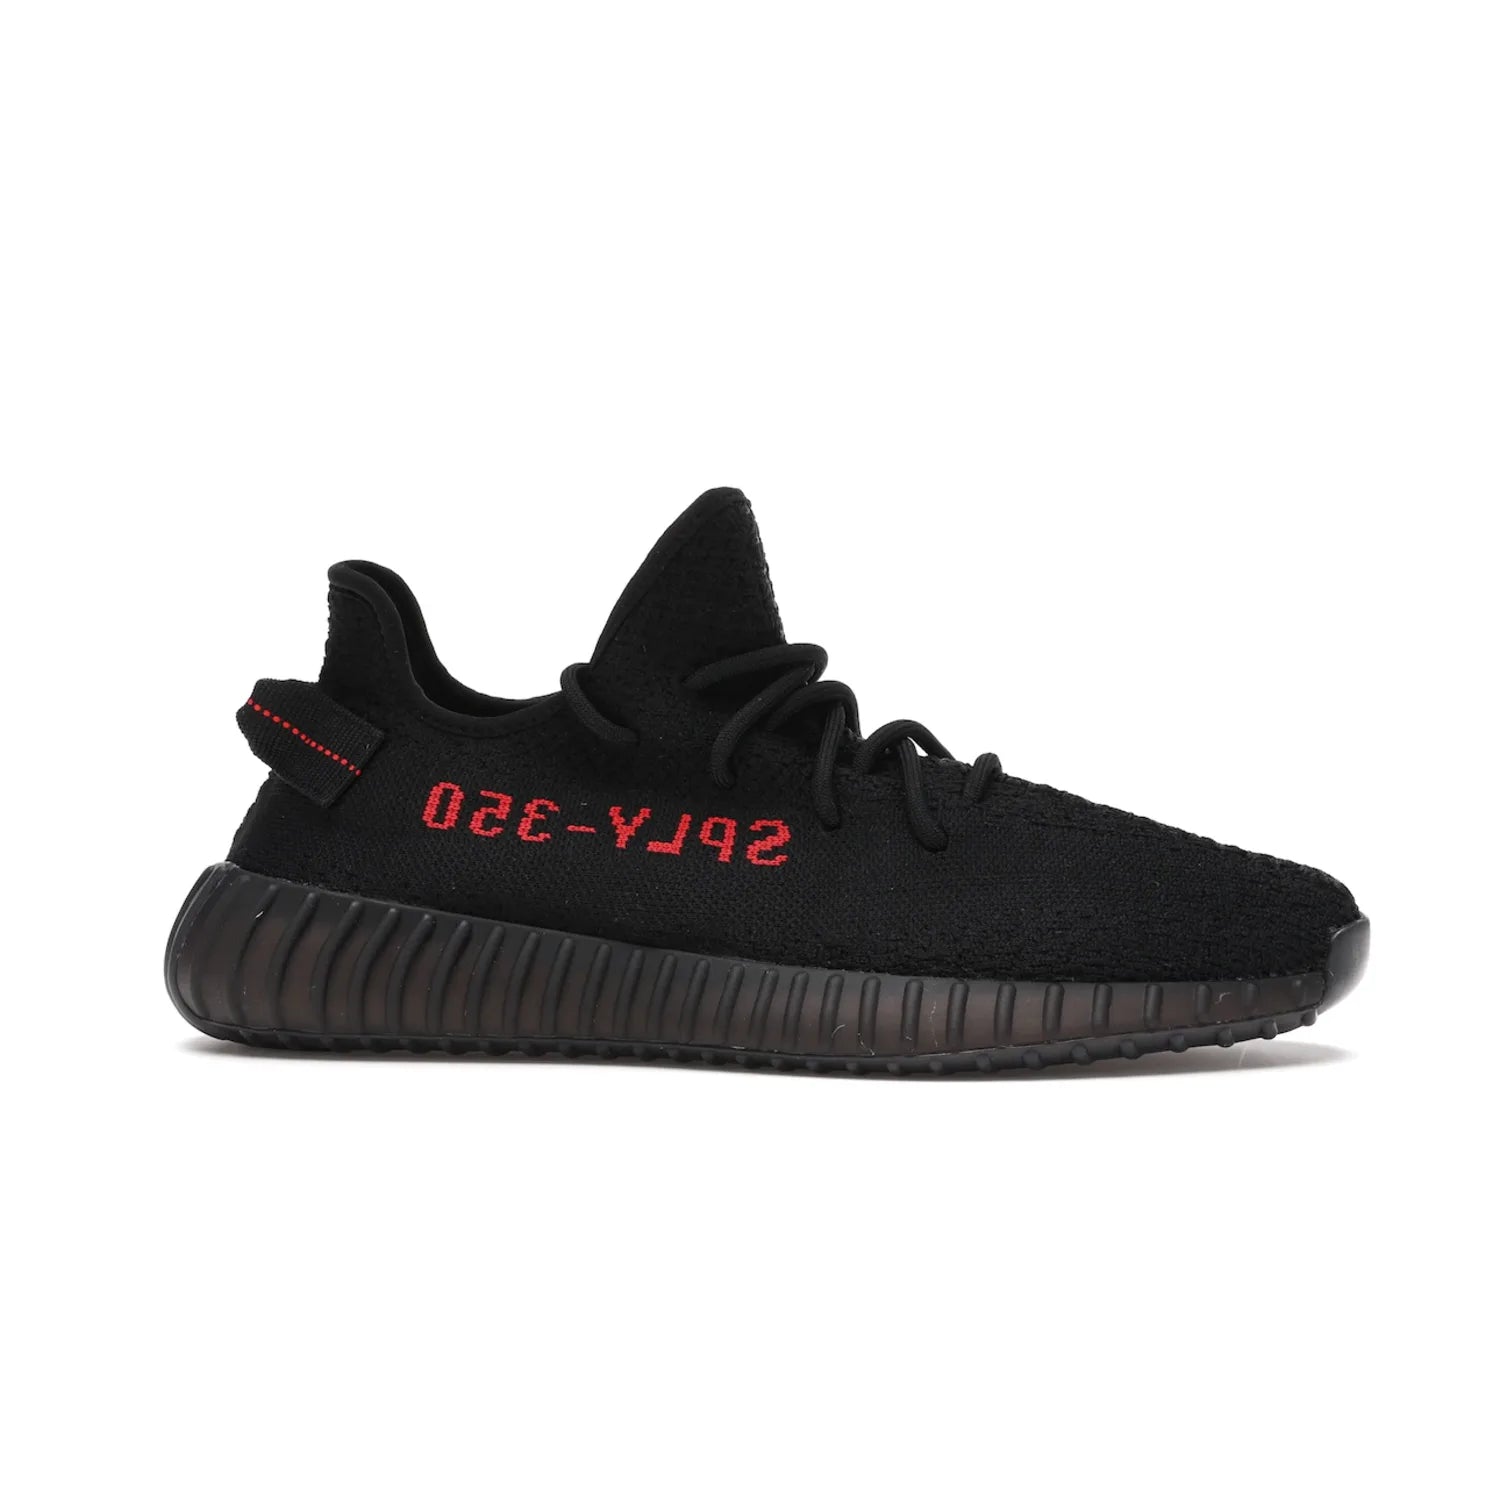 adidas Yeezy Boost 350 V2 Black Red (2017/2020) - Image 2 - Only at www.BallersClubKickz.com - Adidas Yeezy Boost 350 V2 Black Red: a classic colorway featuring black Primeknit upper, BOOST cushioning system, and iconic "SPLY-350" text. Released in 2017 for a retail price of $220.